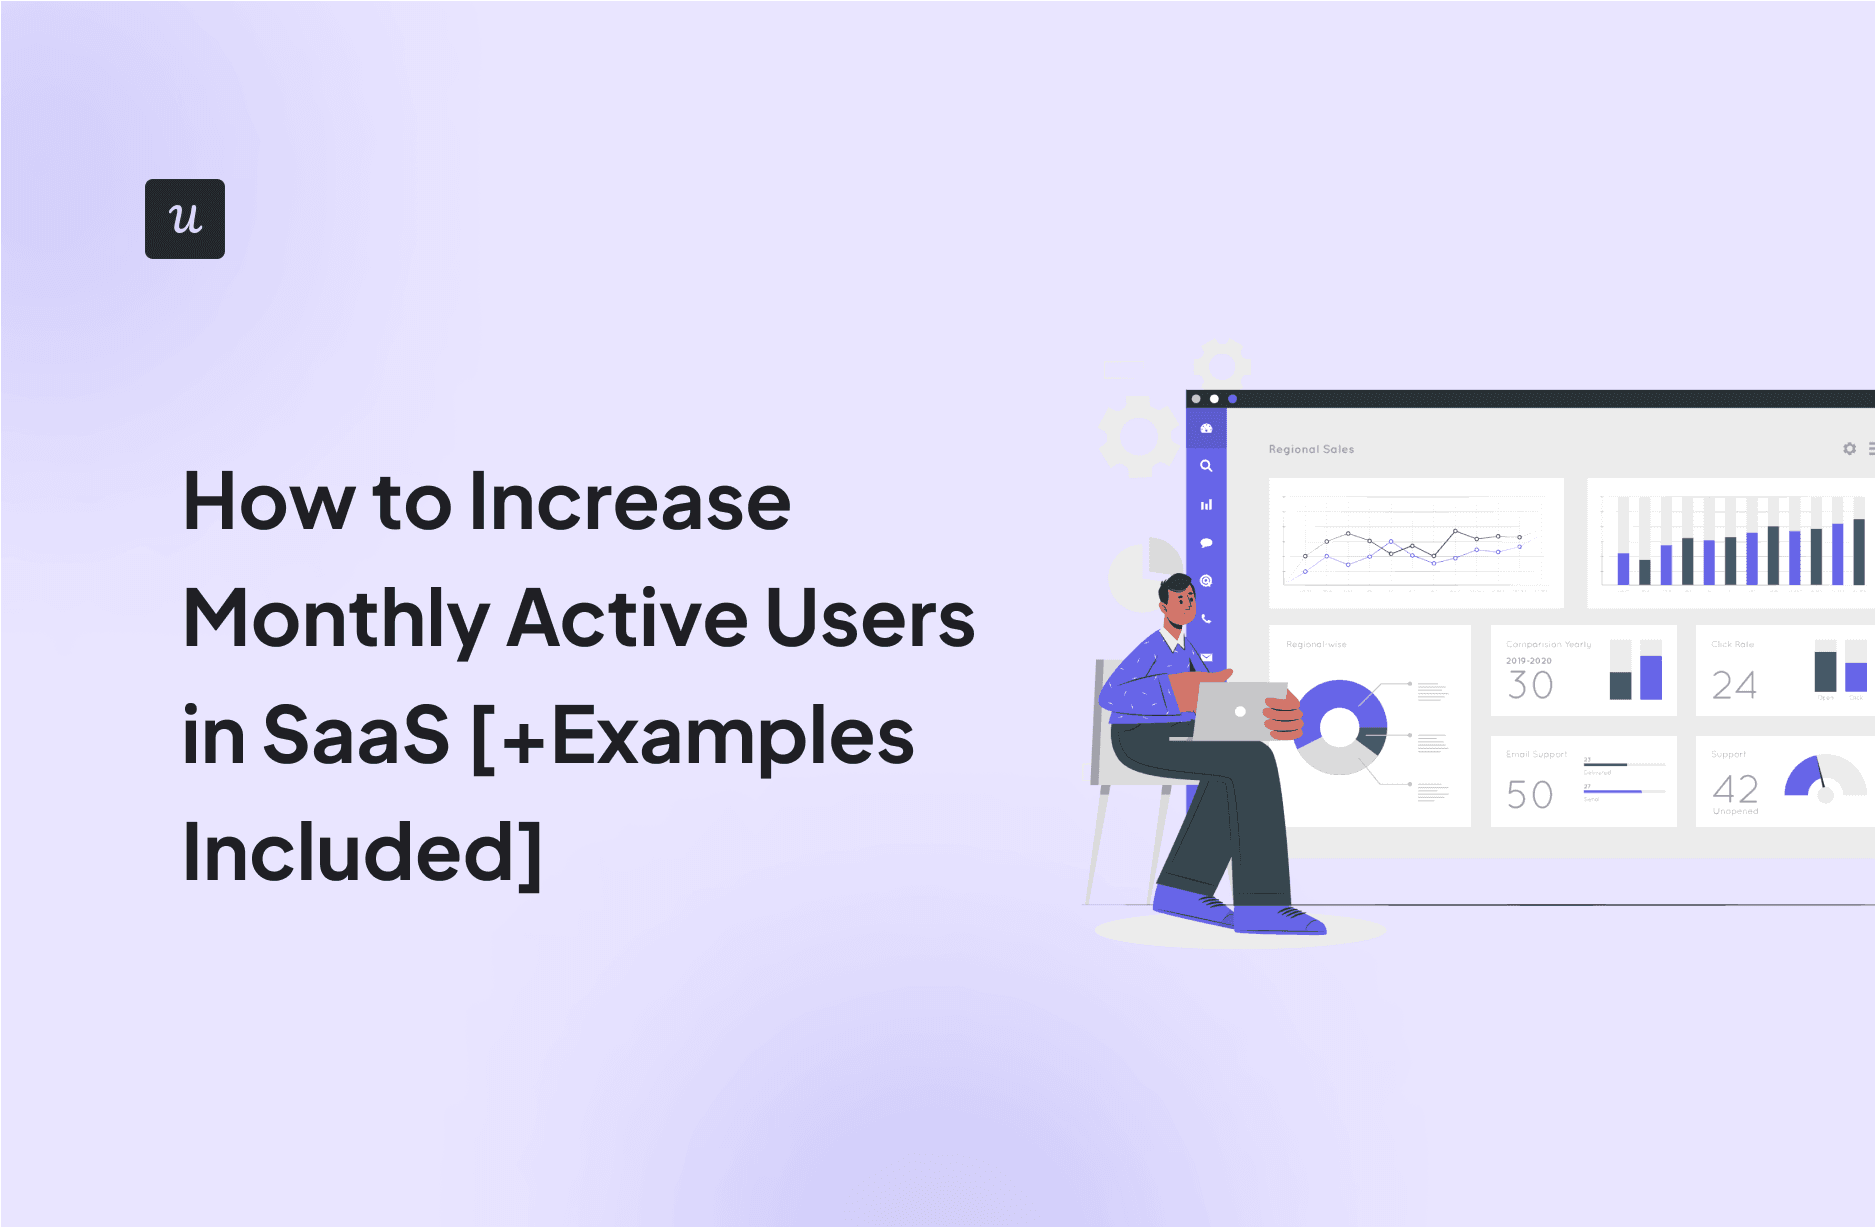 How to Increase Monthly Active Users in SaaS [+Examples Included] cover